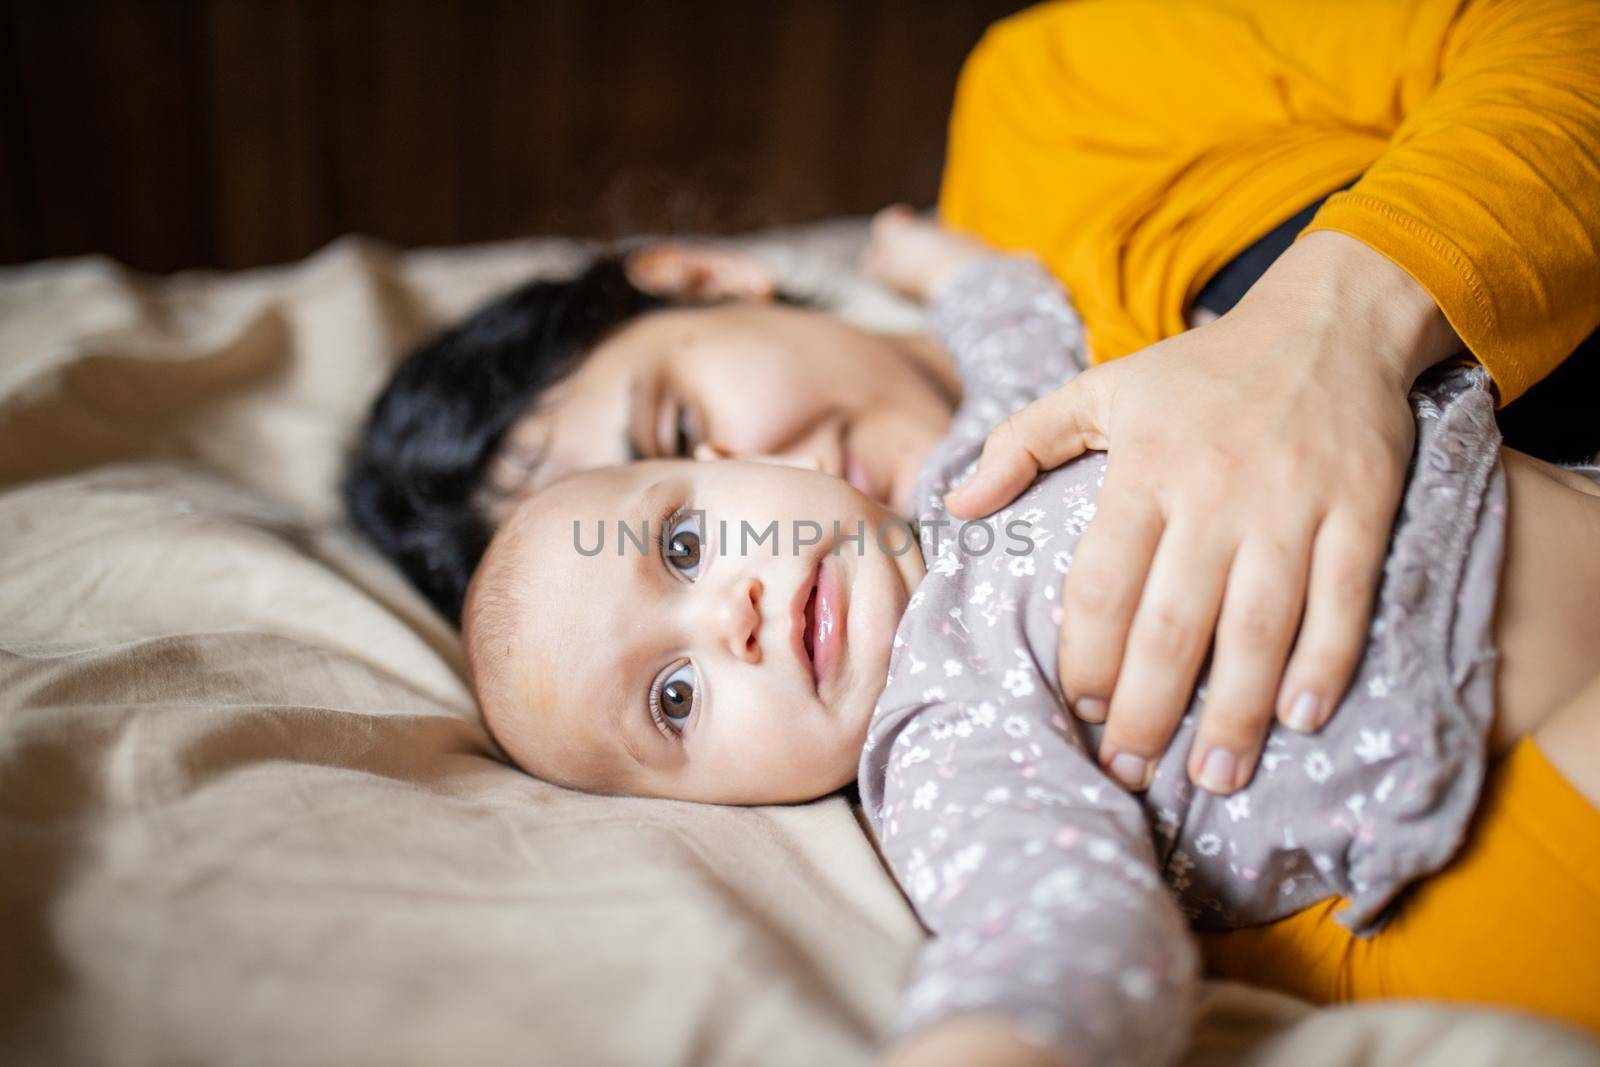 Cute baby lying down on bed next to her sleeping mother. Young woman wearing yellow clothing on bed and tenderly hugging adorable baby. Lovely maternity